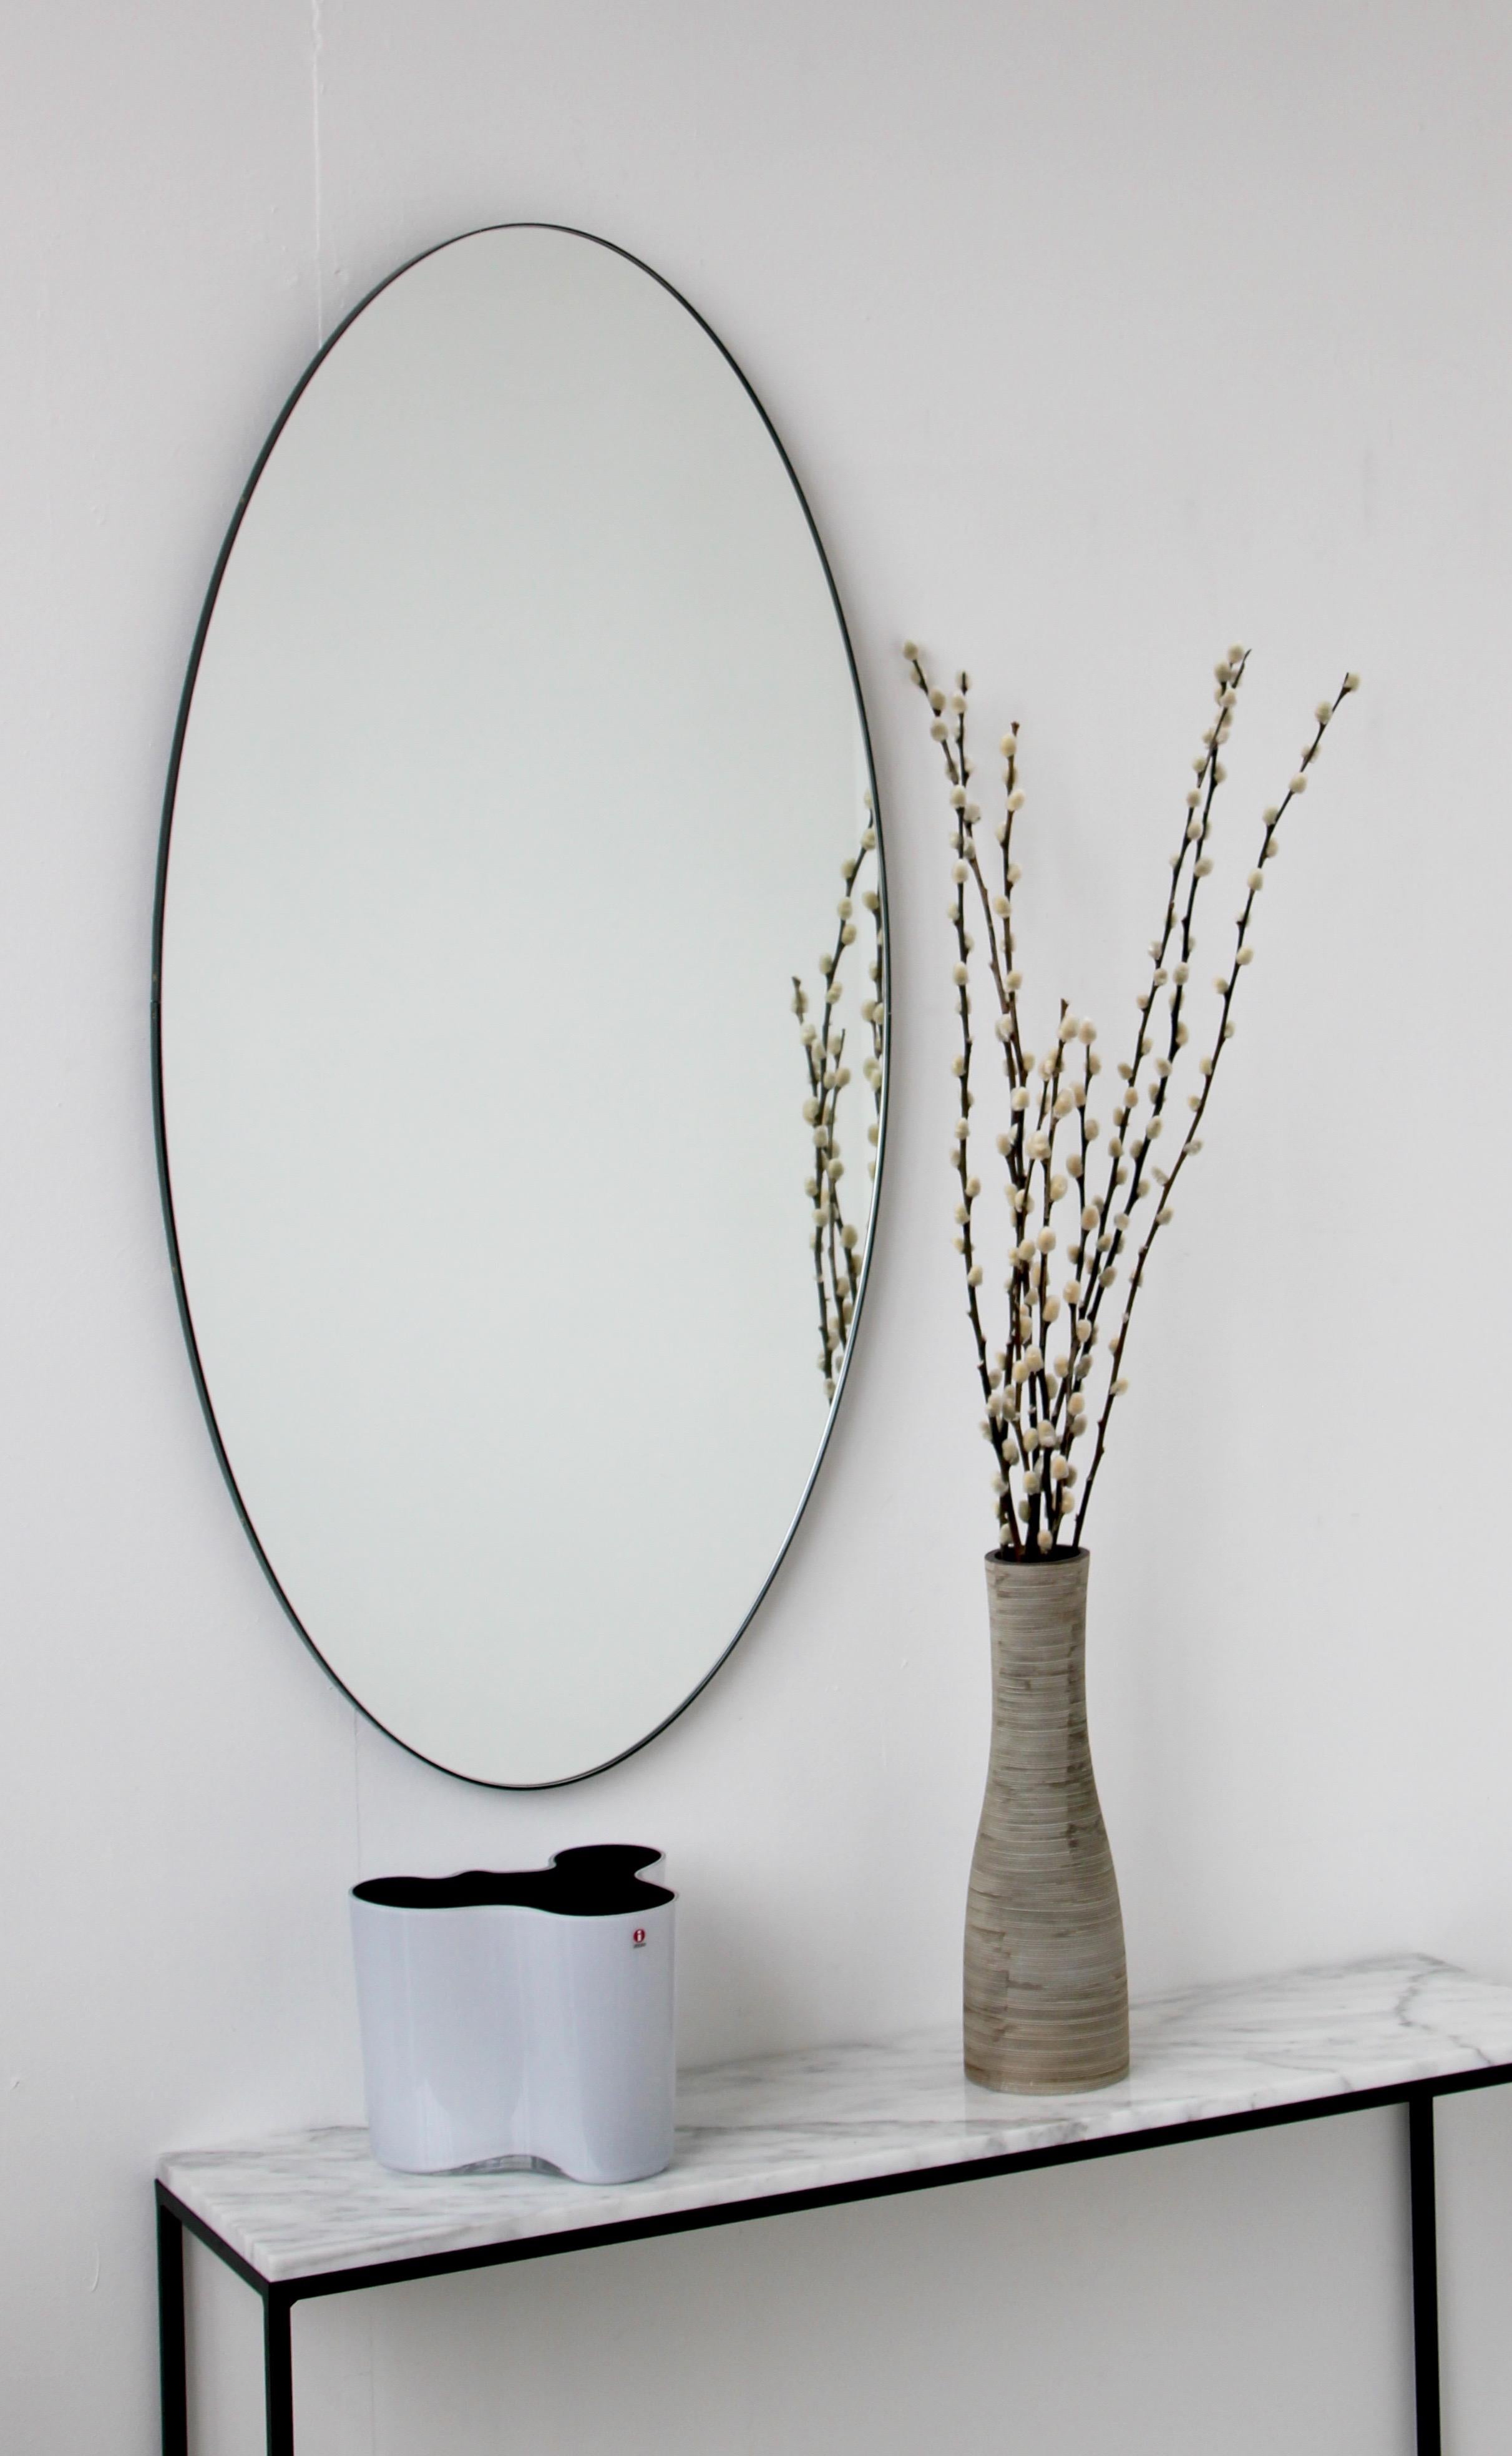 Delightful large oval mirror with a contemporary aluminium powder coated black frame. Designed and handcrafted in London, UK.

Our mirrors are designed with an integrated French cleat (split batten) system that ensures the mirror is securely mounted